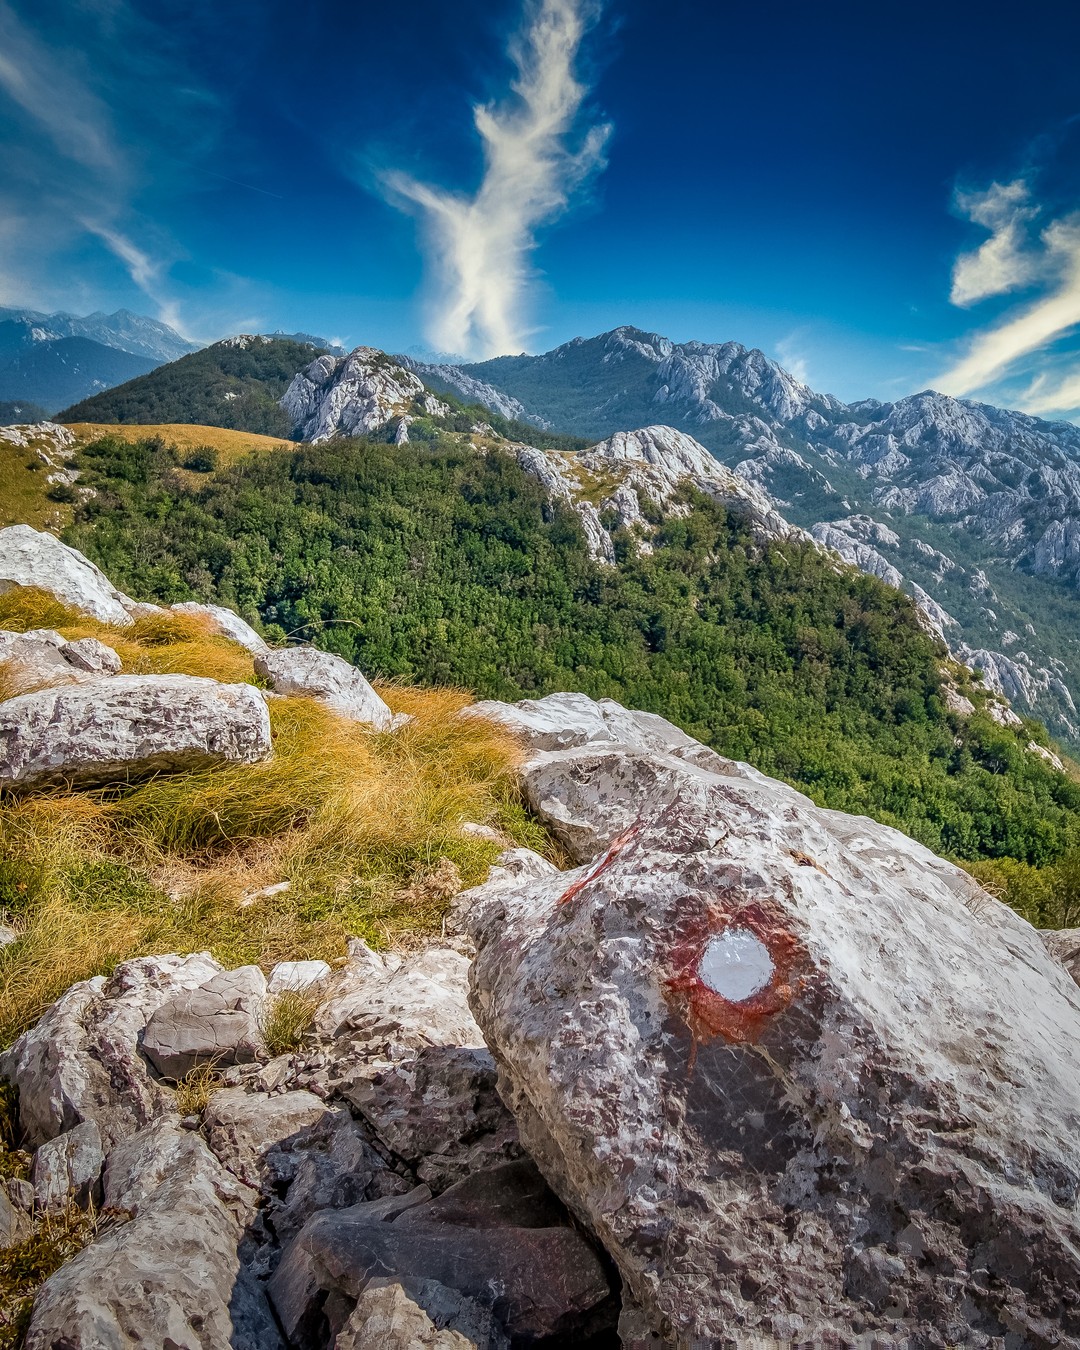 Cresting a ridge during the @highlandercroatia as another magnificent scene unfolds over the trail. 

The Highlander Velebit in #Croatia is a 104km, 5-day alpine trail which traverses the Velebit Range dividing continental Croatia from the Adriatic coast.

The @highlander.adventure is a collection of organised treks exploring some of Europe’s premier hiking regions, home to magnificent expanses of wilderness. The current routes are Croatia, Bosnia & Herzegovina, Austria, Greece and Serbia, but there will be more destinations added next year.

The events make for an ideal introduction to multiday trekking with all meals, suggested routes and maps supplied. The treks are non-competitive, but there are daily checkpoints to pass through to gain your certificate and medal. 🏅

Keep an eye on my feed as we'll be offering free entry into next year's Highlander Velebit in Croatia.

#highlandervelebit #highlander #adventureofalifetime